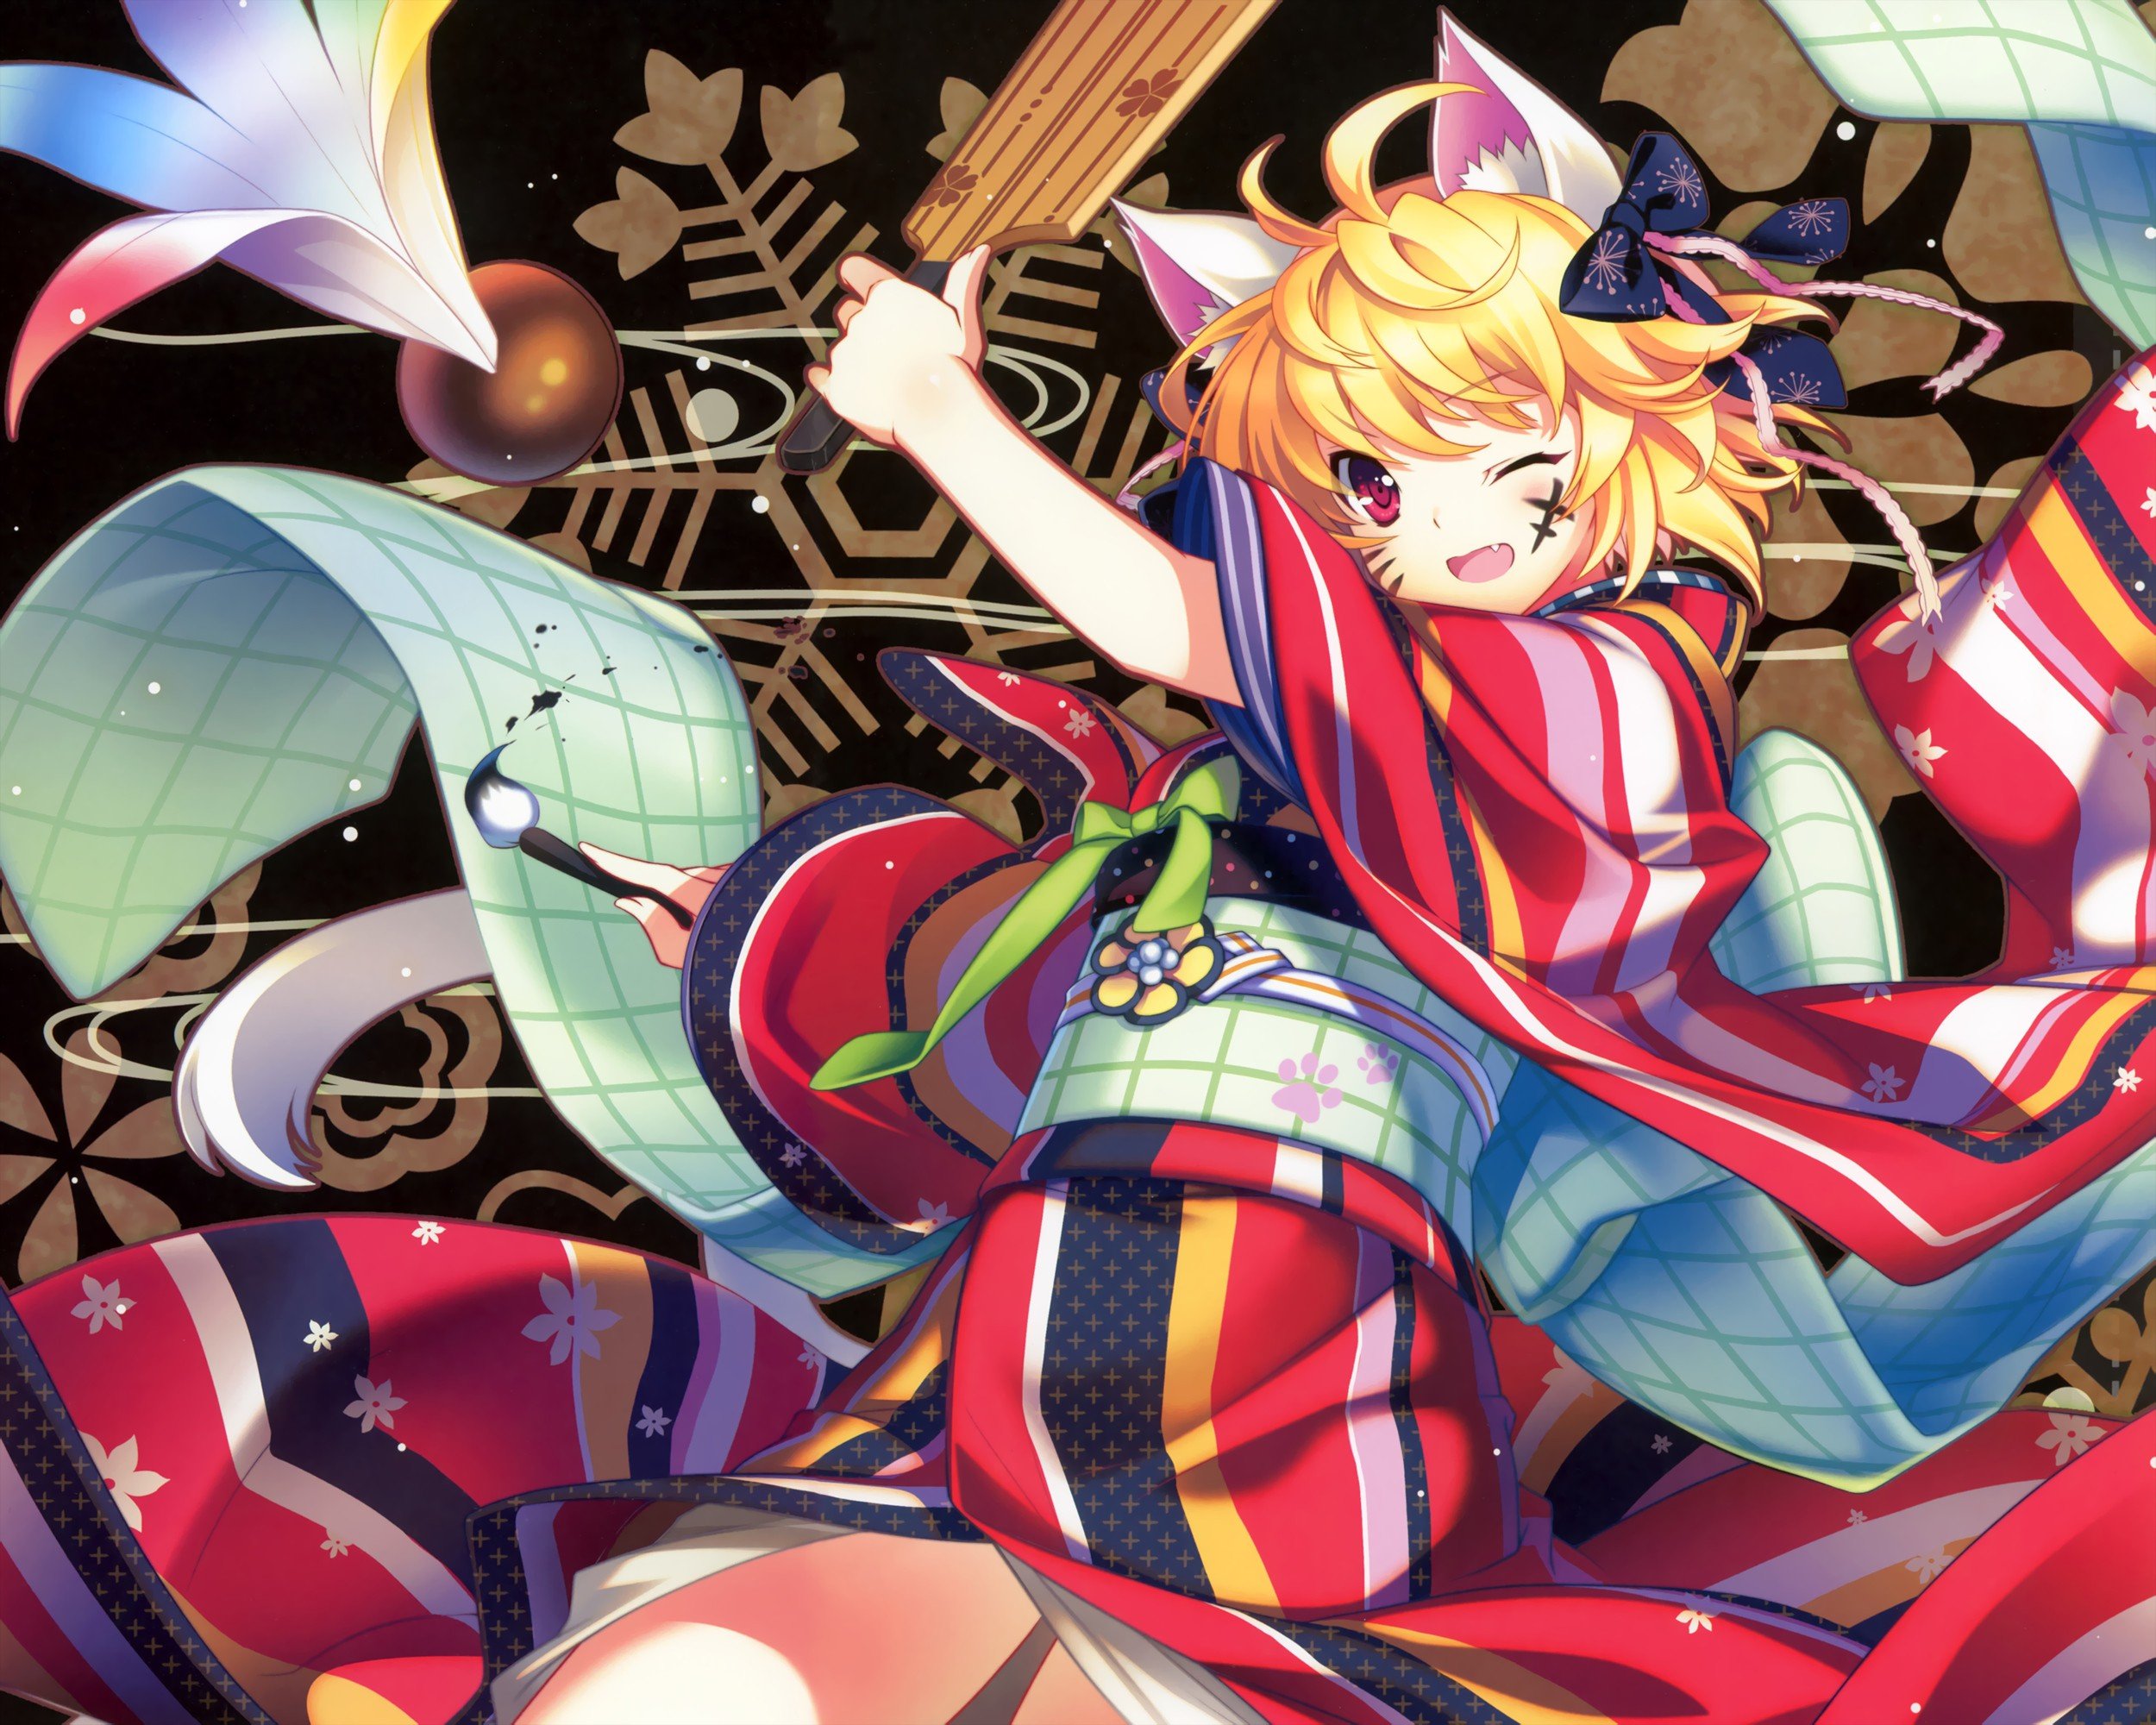 blondes, Ribbons, Kimono, Animal, Ears, Short, Hair, Cat, Ears, Open, Mouth, Hair, Ribbons, Wink, Pink, Eyes, Japanese, Clothes, Anime, Girls, Paint, Brushes, Hair, Ornaments Wallpaper